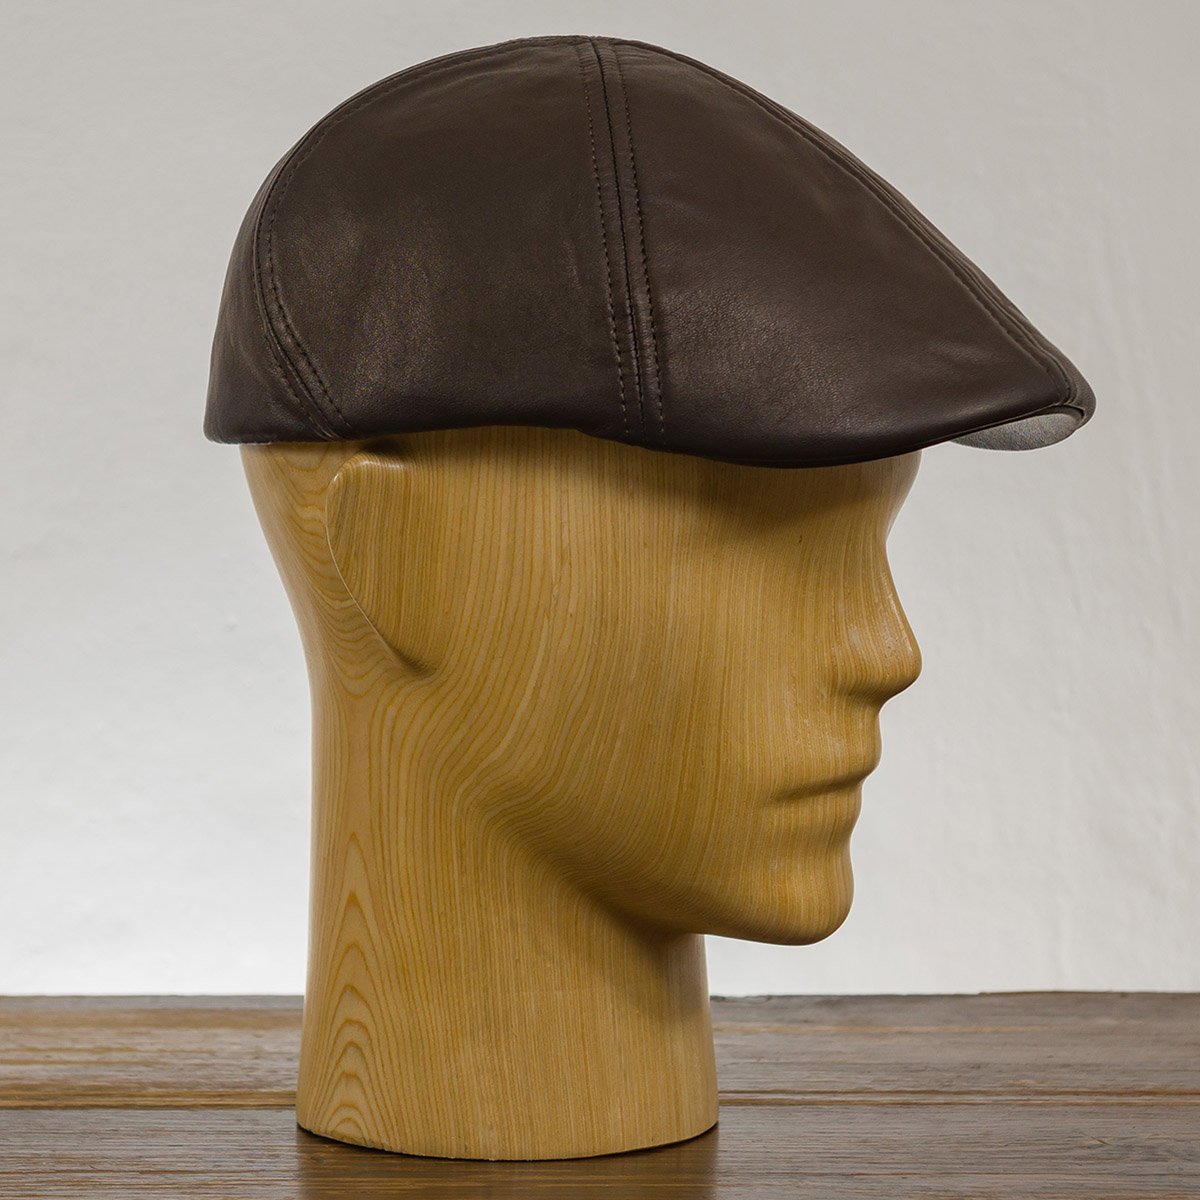 Dodger genuine leather six panels Duckbill cap with breathable lining ...